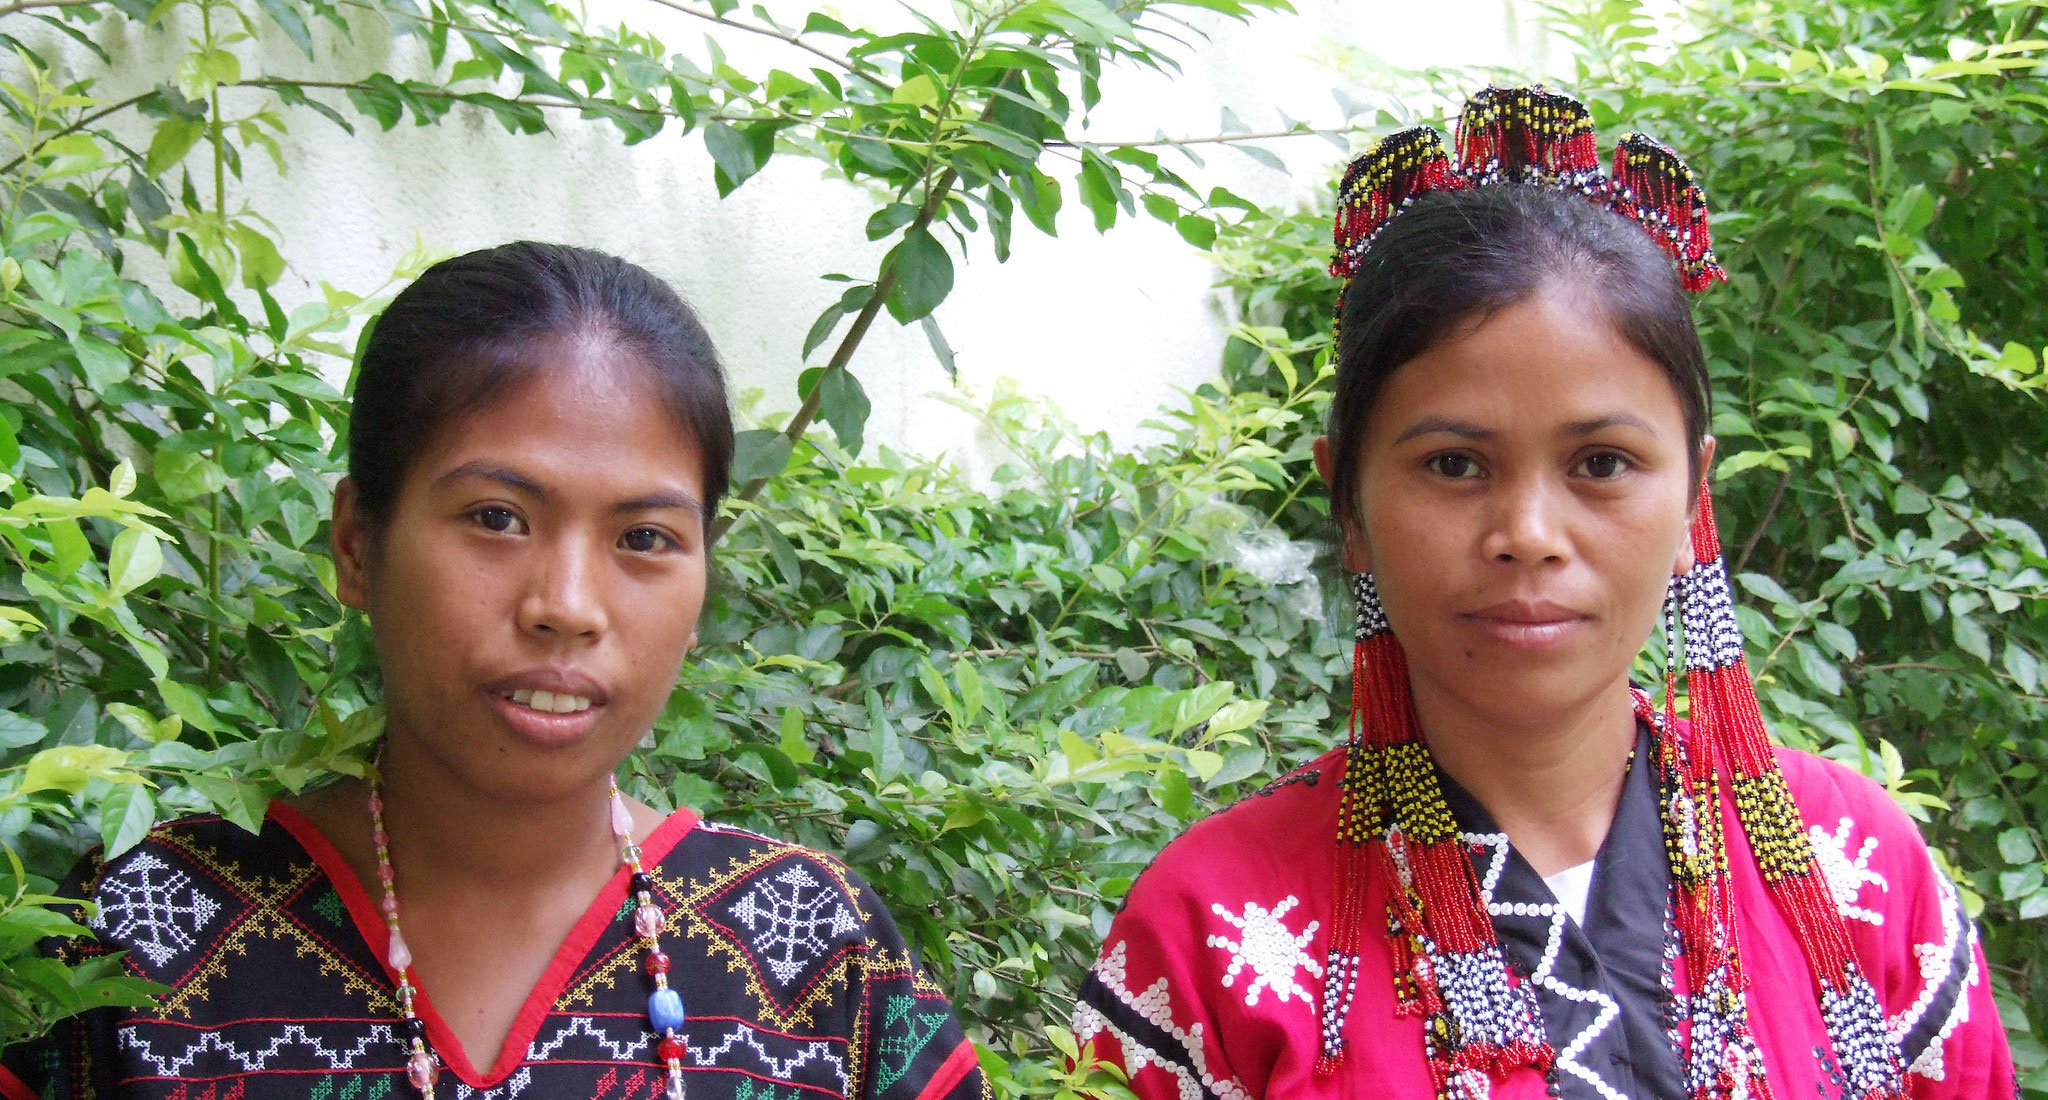 Two indigenous women with bright clothes and jewellery